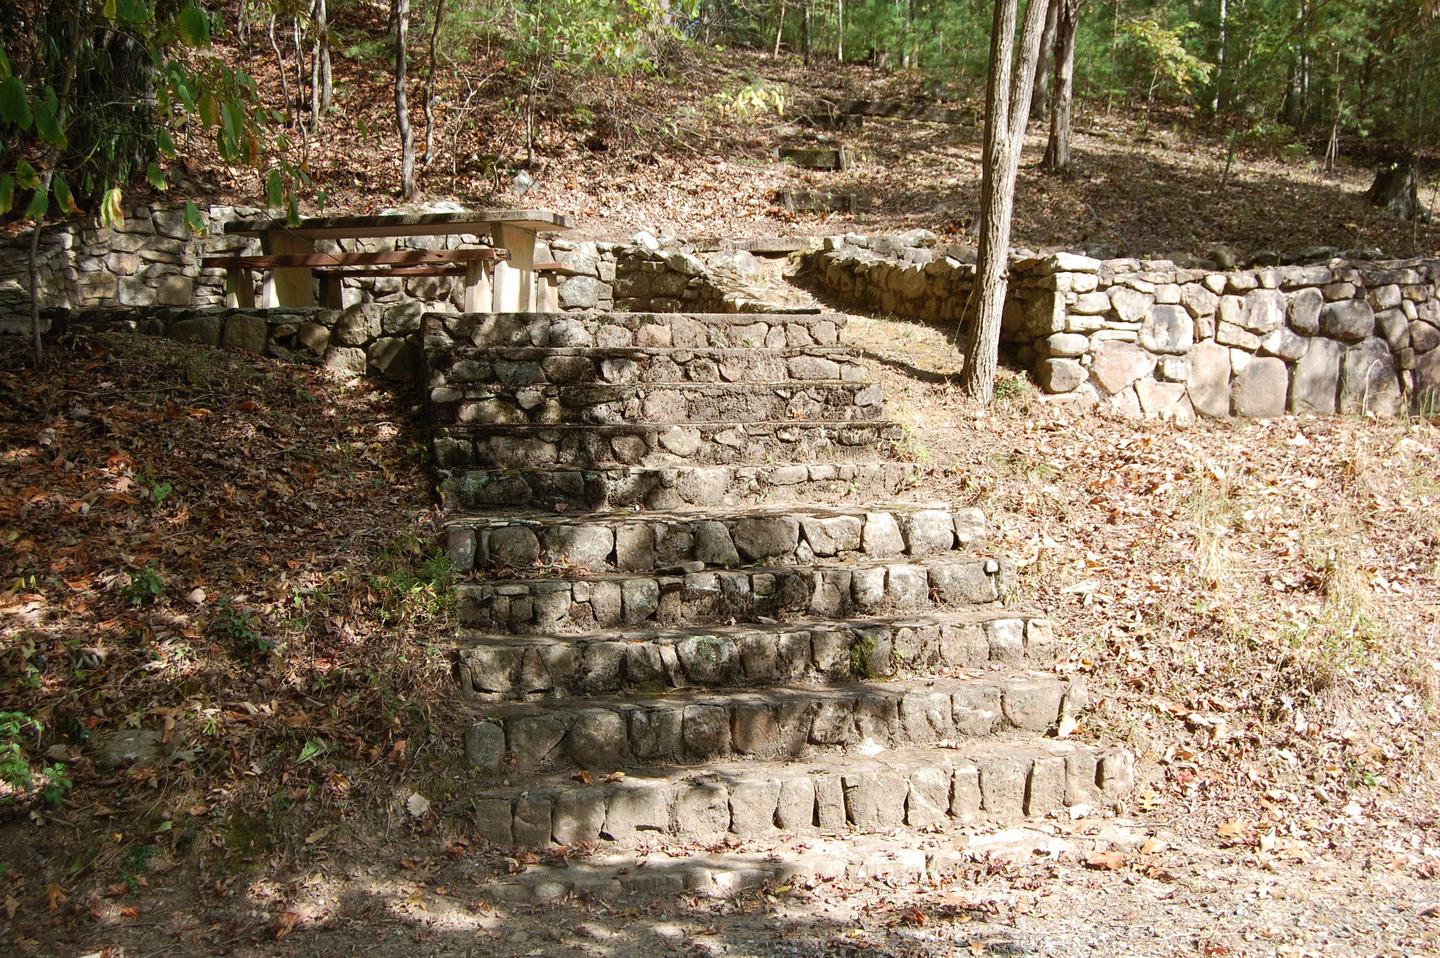 12 Stairs Site is in a desirable private wooded area of the campground. Stairs lead up to a shaded picnic area and tent pad. 